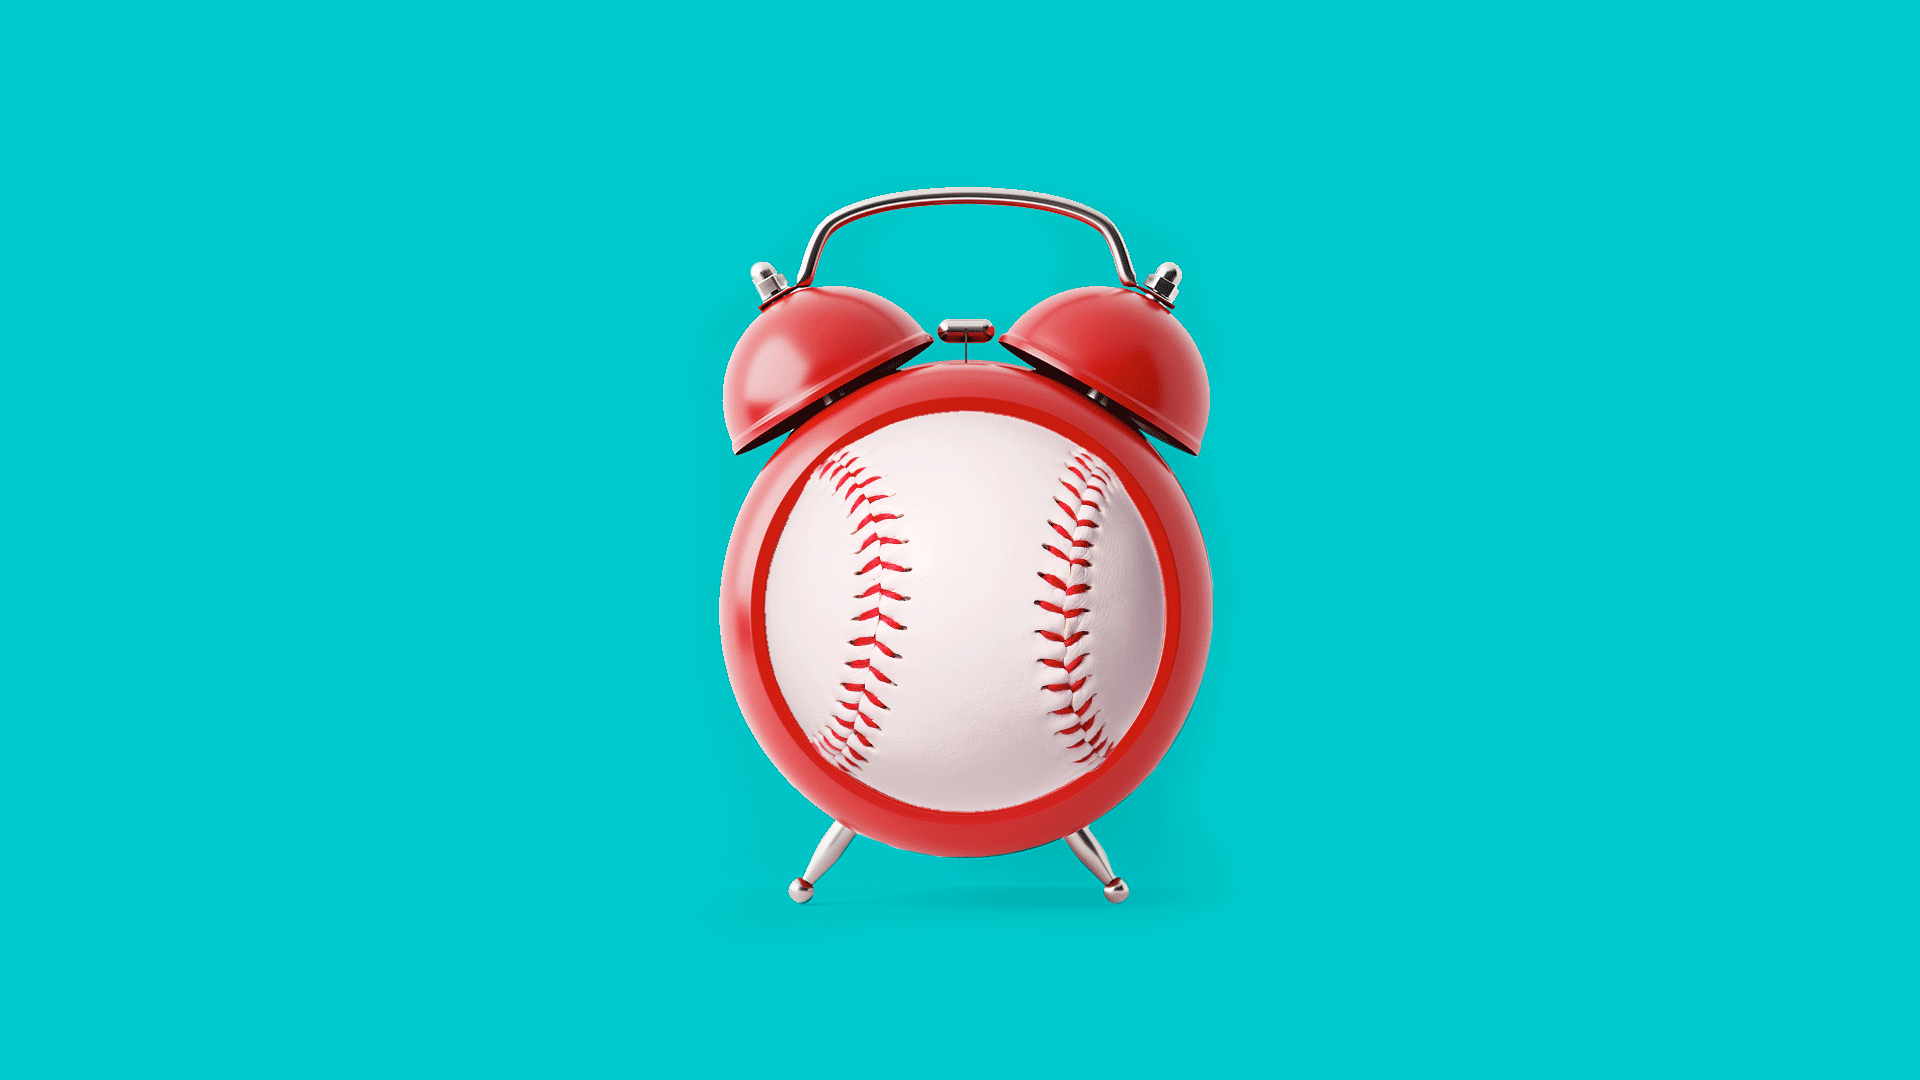 Animated illustration of a baseball as an alarm clock going off